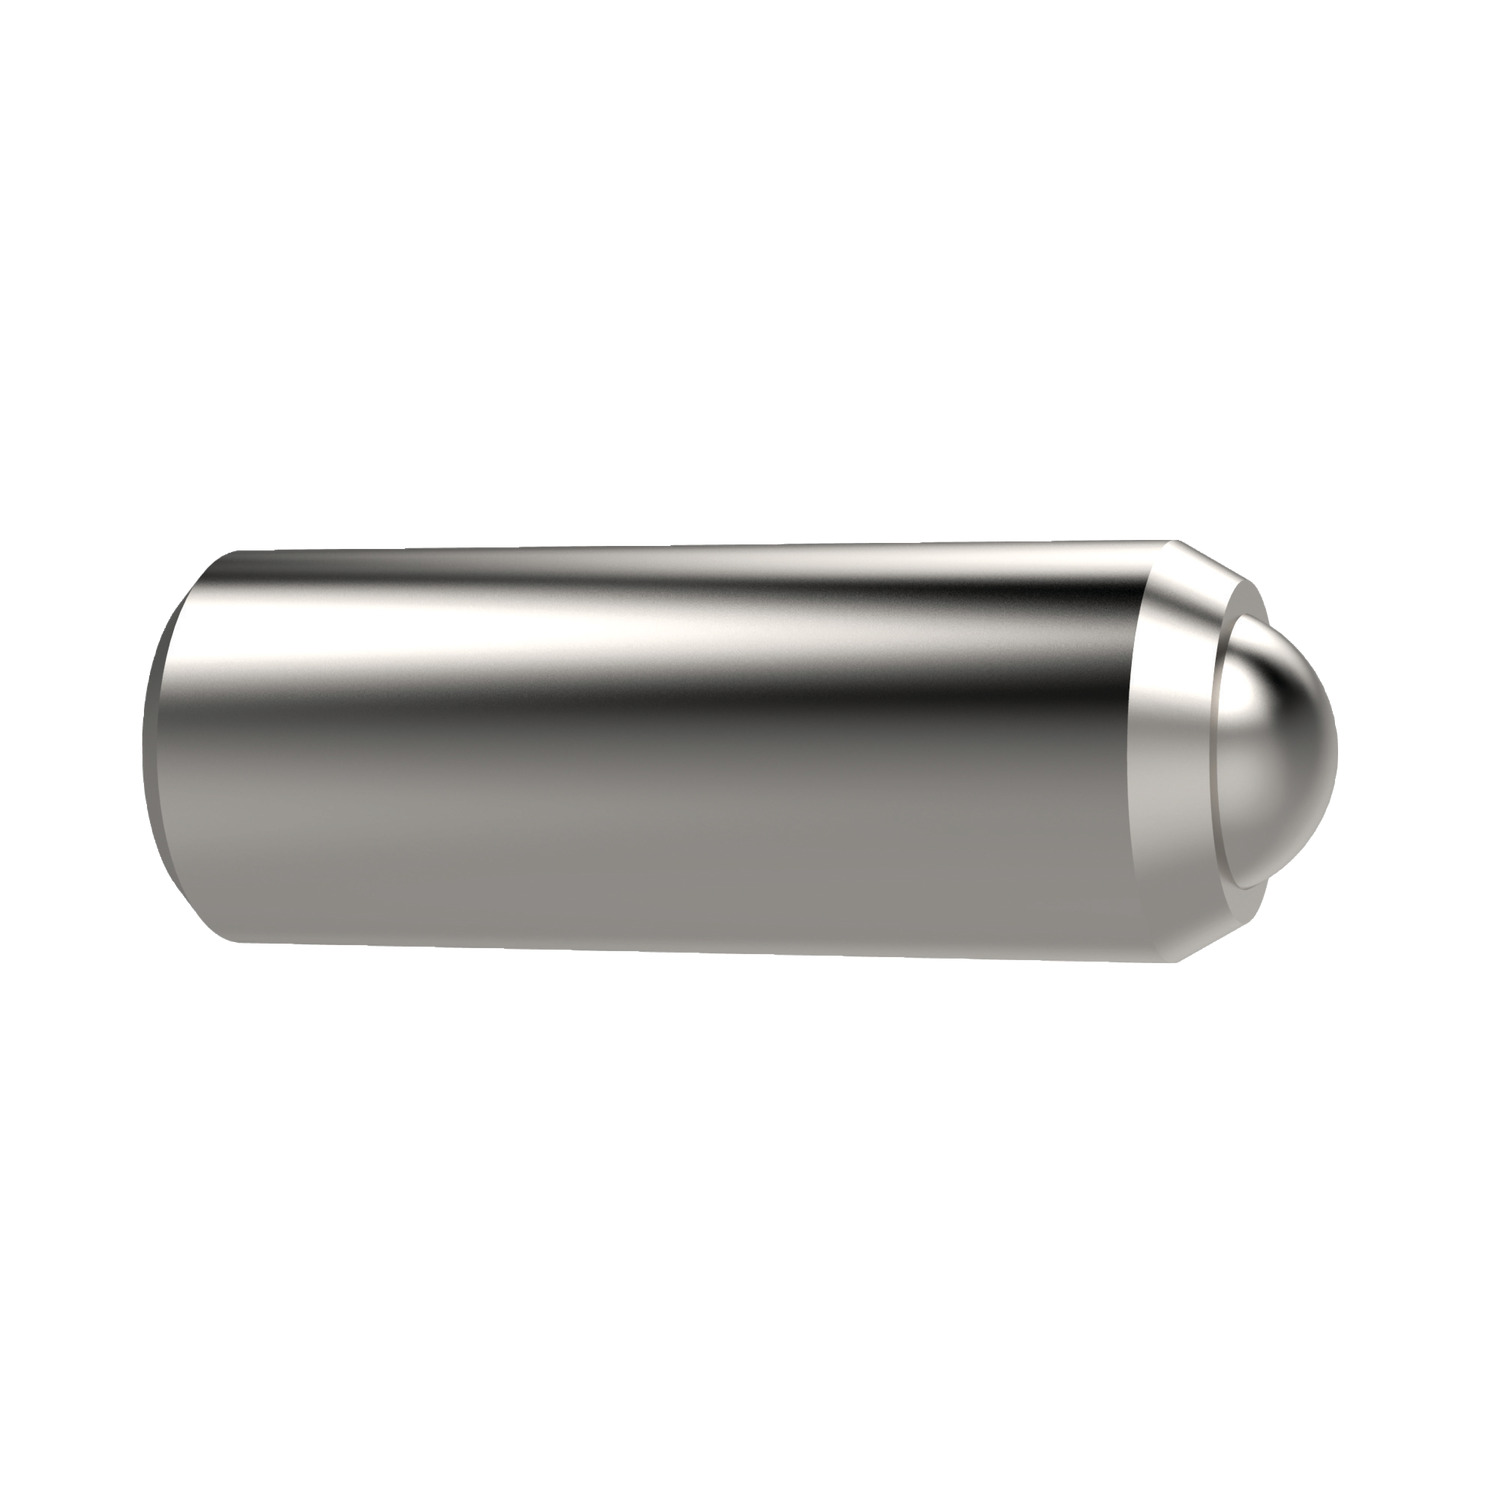 32280.W0320 Spring Plunger - Ball - Smooth Model All Stainless - 5,0 - 3,5 - 13,0 EC:20254537 WG:05063055915472